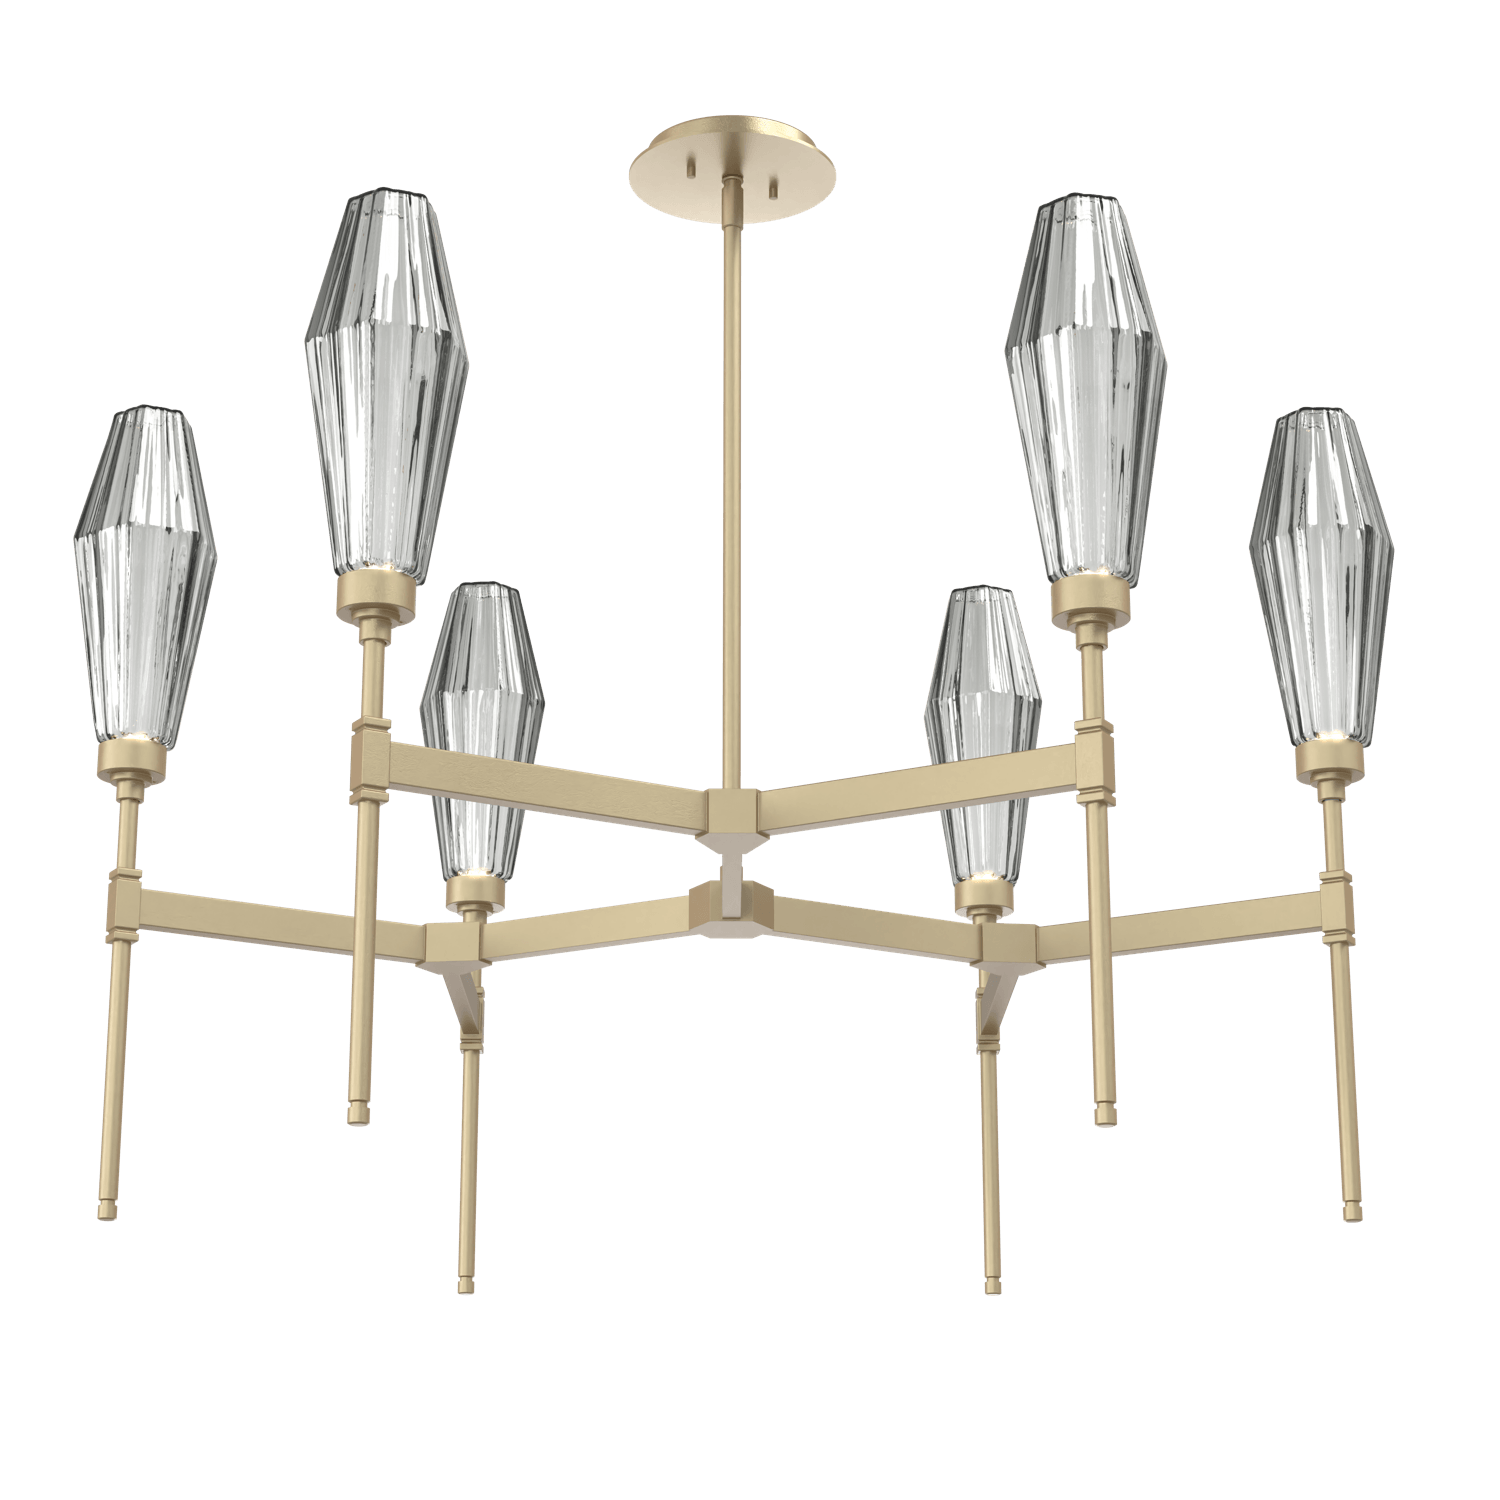 CHB0049-37-GB-RS-Hammerton-Studio-Aalto-37-inch-round-belvedere-chandelier-with-gilded-brass-finish-and-optic-ribbed-smoke-glass-shades-and-LED-lamping